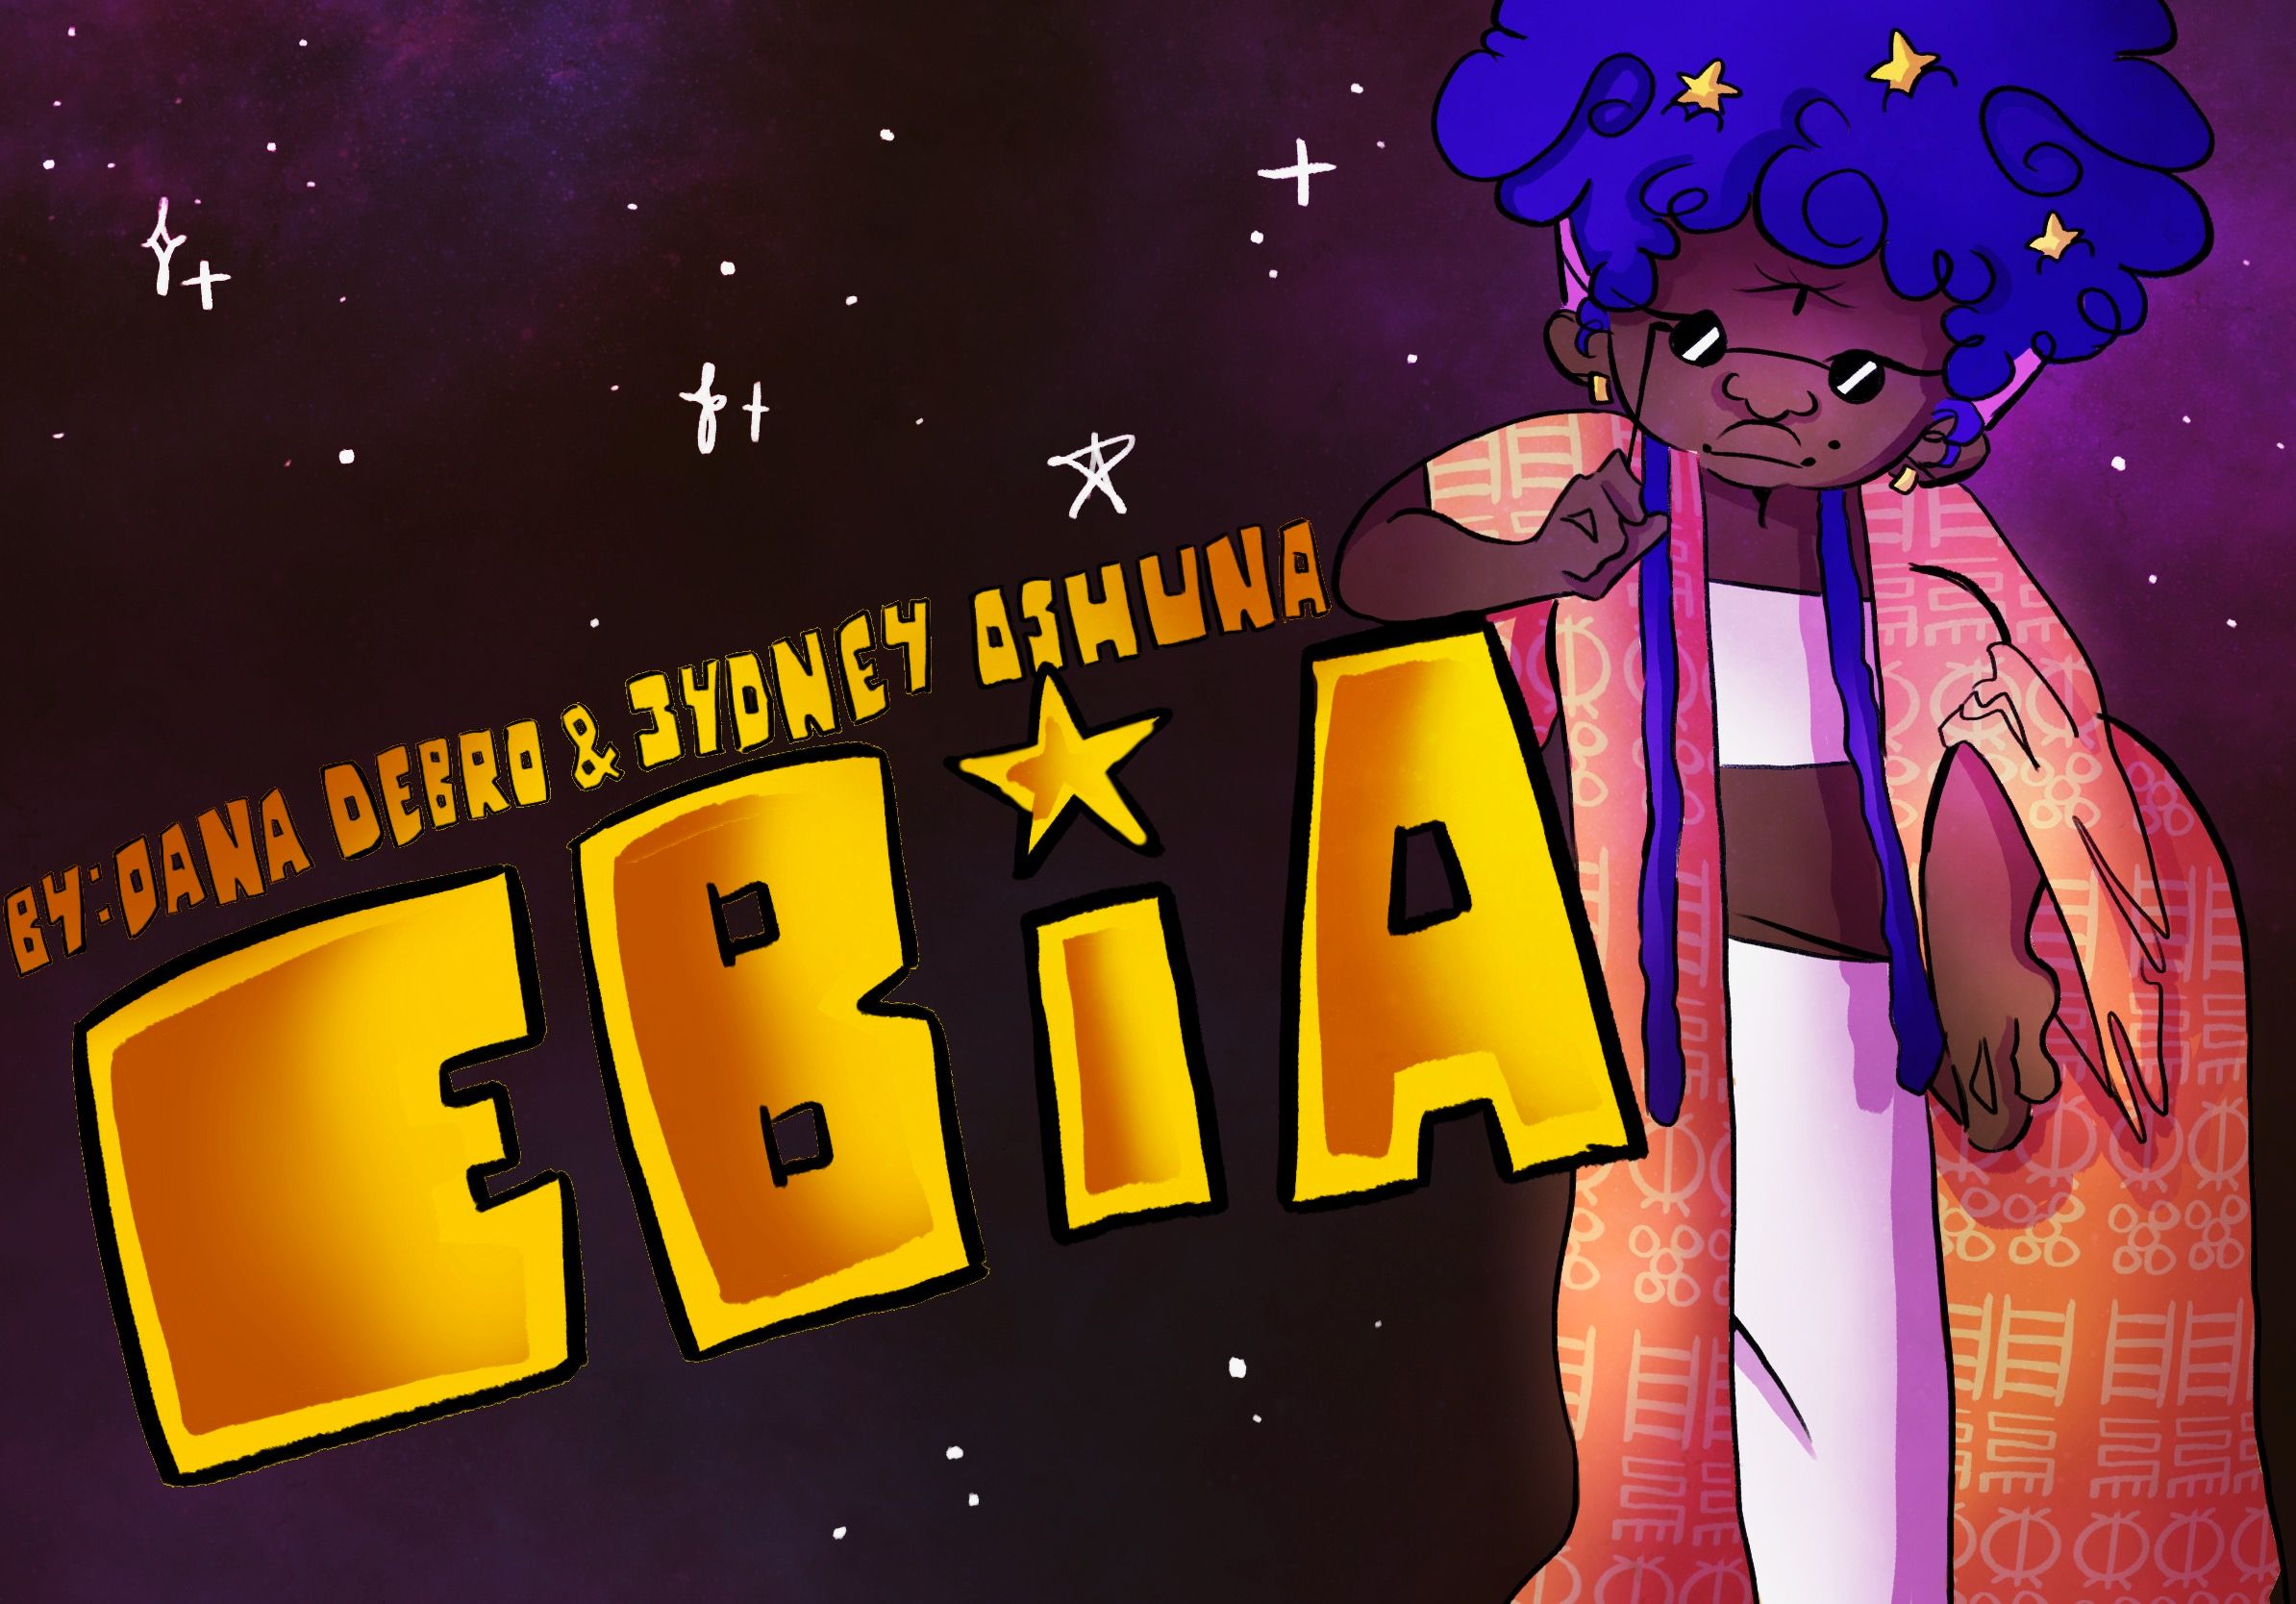 Tex reads: EBIA, by Dana Debro and Sydney Oshuna. An animated character, Black with blue hair in a coral-colored, patterned robe, leans on the text “Ebia” holding sunglasses to their eyes.